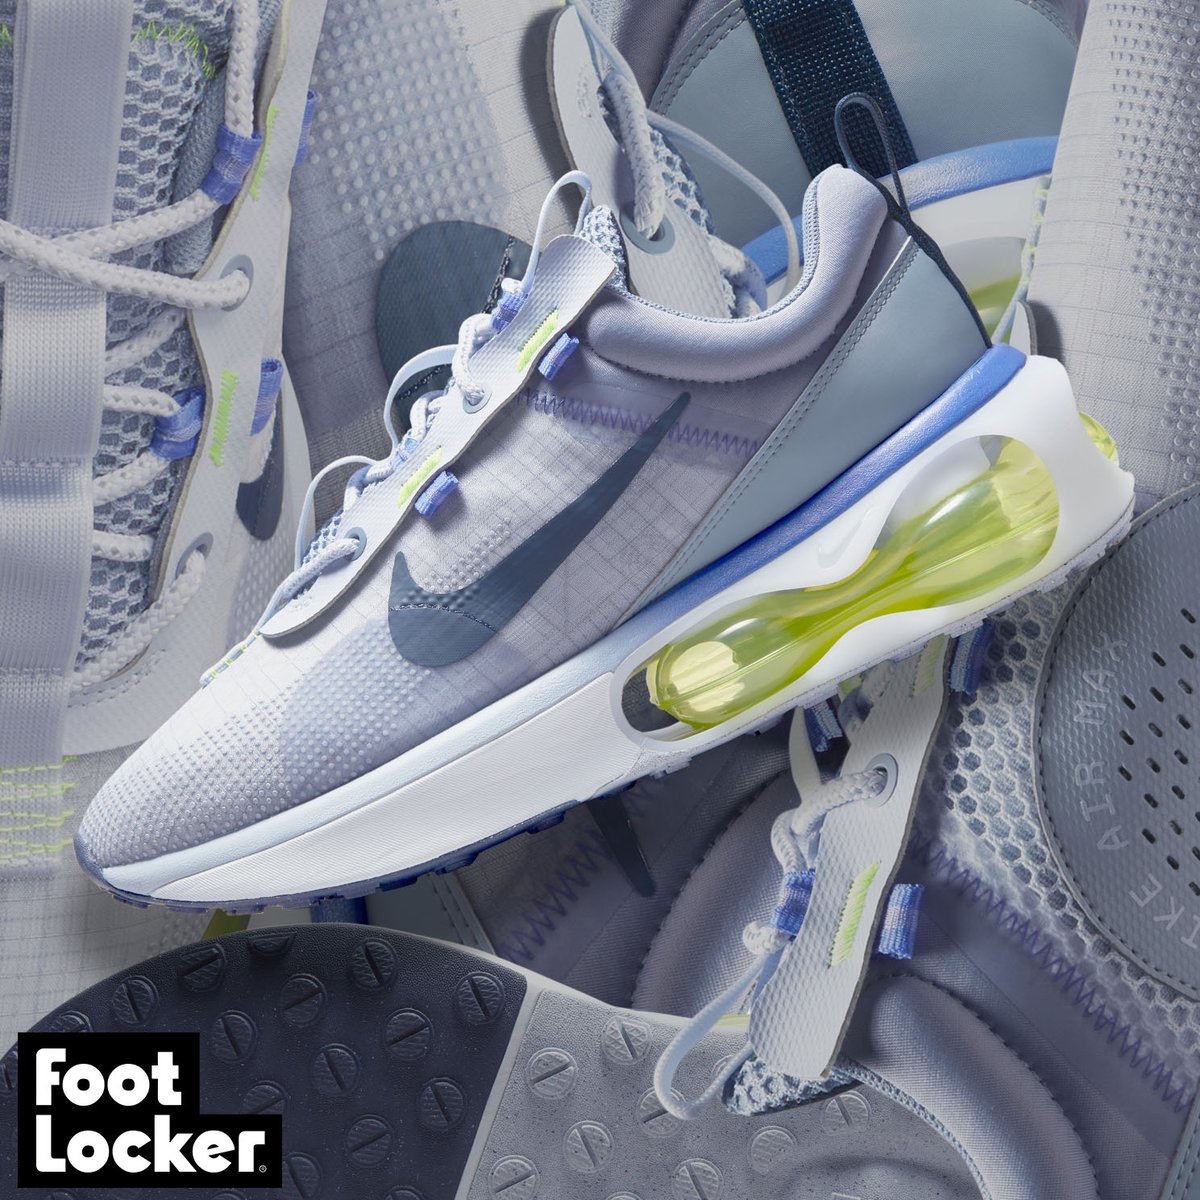 Foot on Twitter: new generation Air ☁️ #Nike Air Max 2021 is now available online and select stores. Shop: https://t.co/0lMuEJ7n5w https://t.co/QbtLNNv8lT" / Twitter